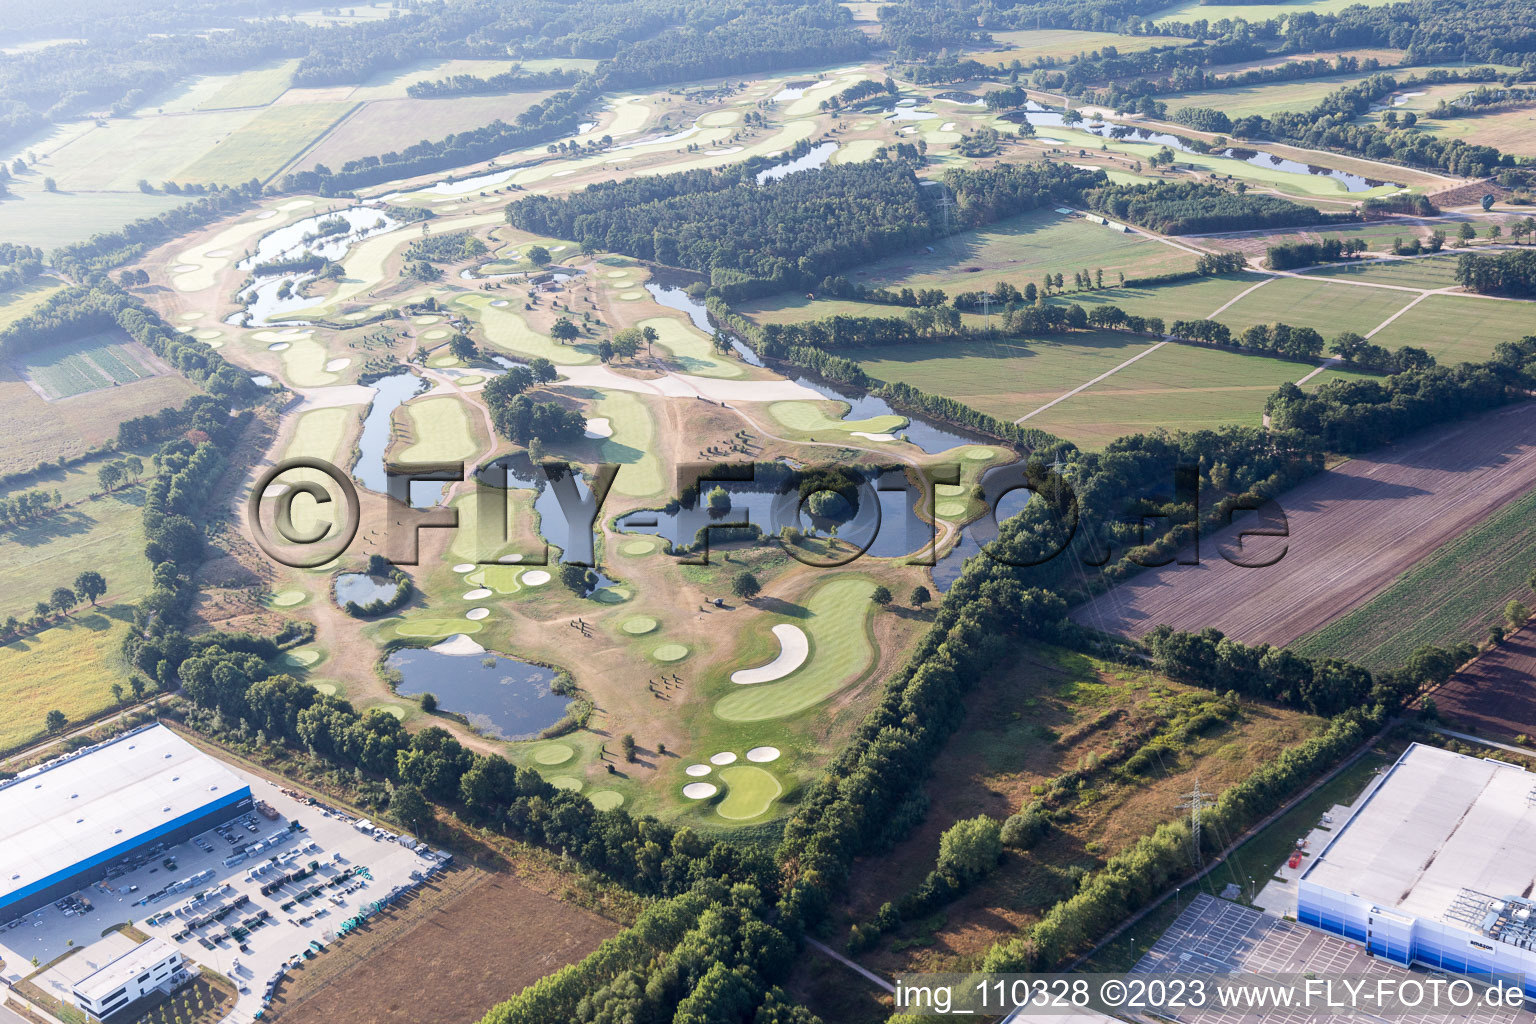 Grounds of the Golf course at Green Eagle Golf Courses in Winsen (Luhe) in the state Lower Saxony, Germany